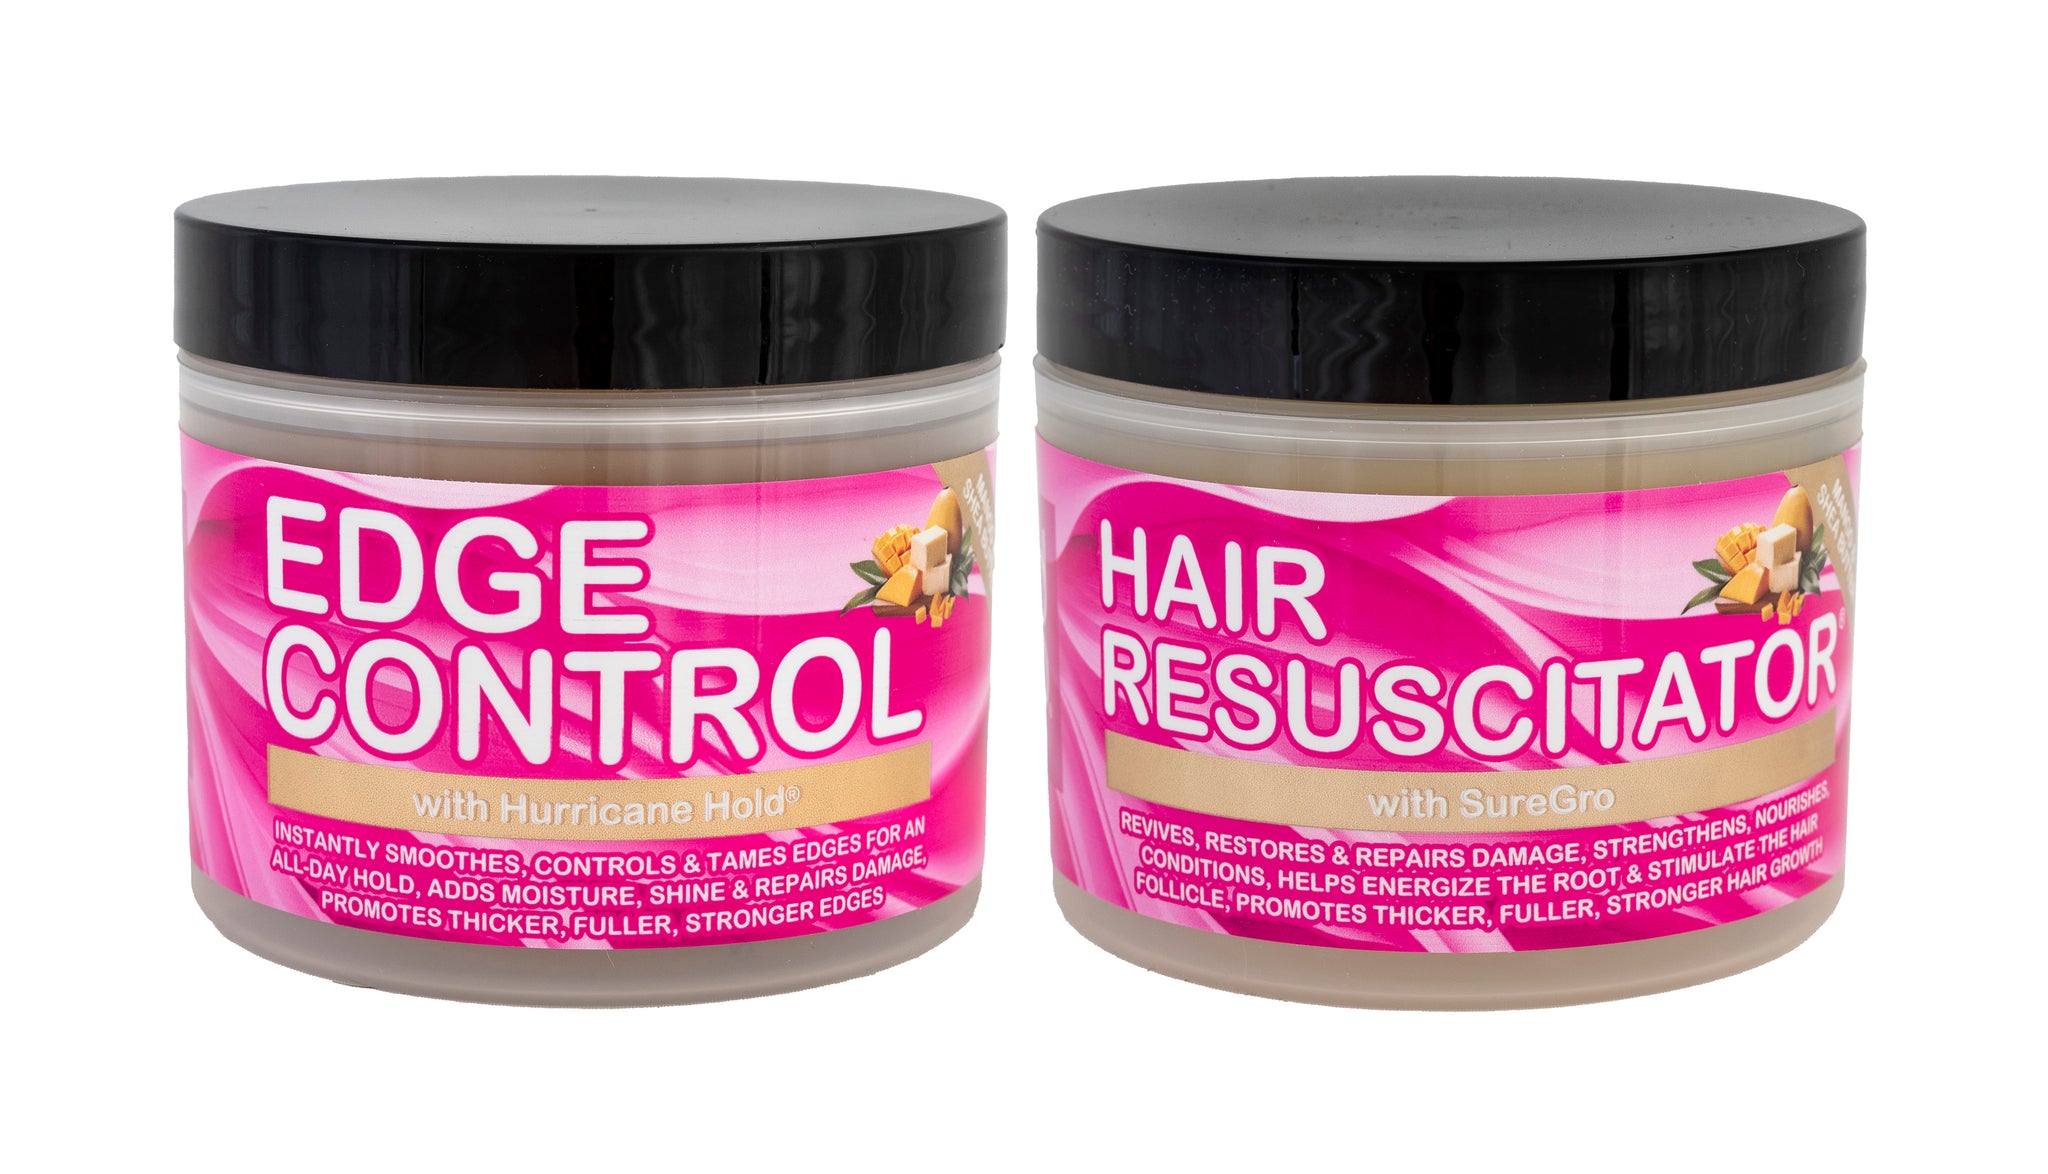 Good2Gro Hair Resuscitator with SureGro, Restores, Repairs, Damaged Hair & Edges, Strengthens & Re- Energizes The Root To Stimulate Hair Follicle Growth 4oz.